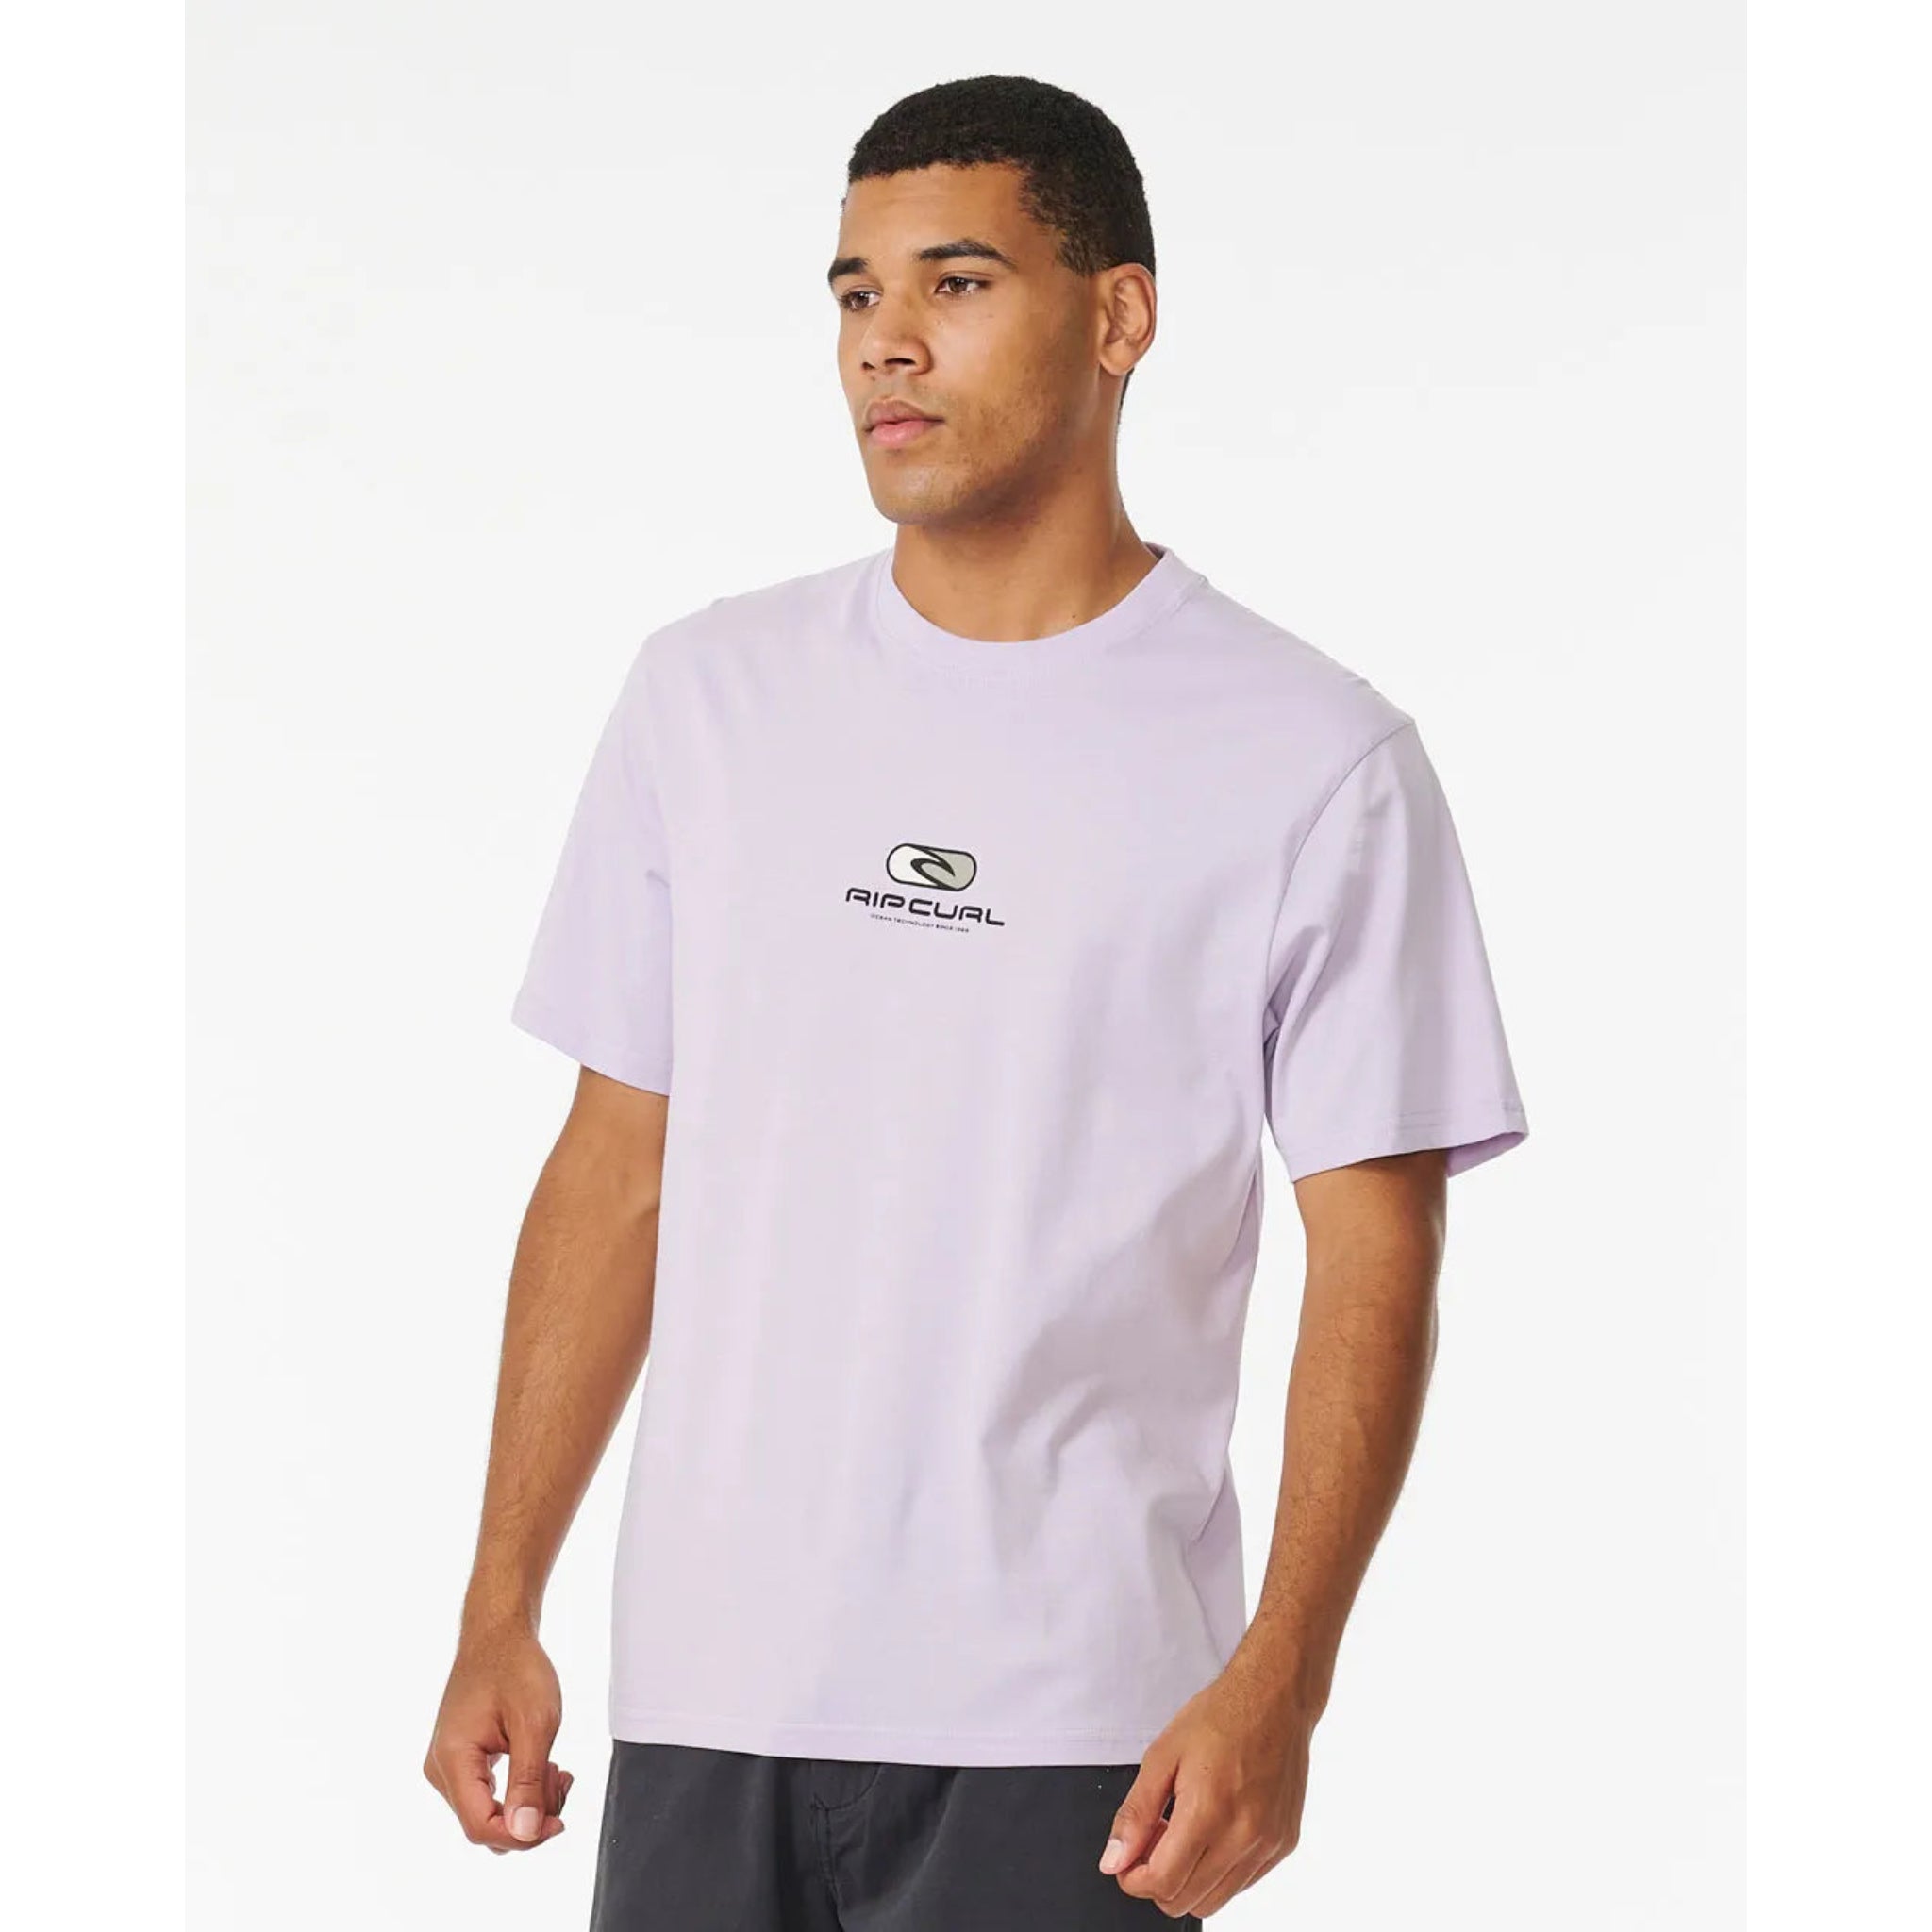 Rip Curl Pill Icon Tee - Lilac